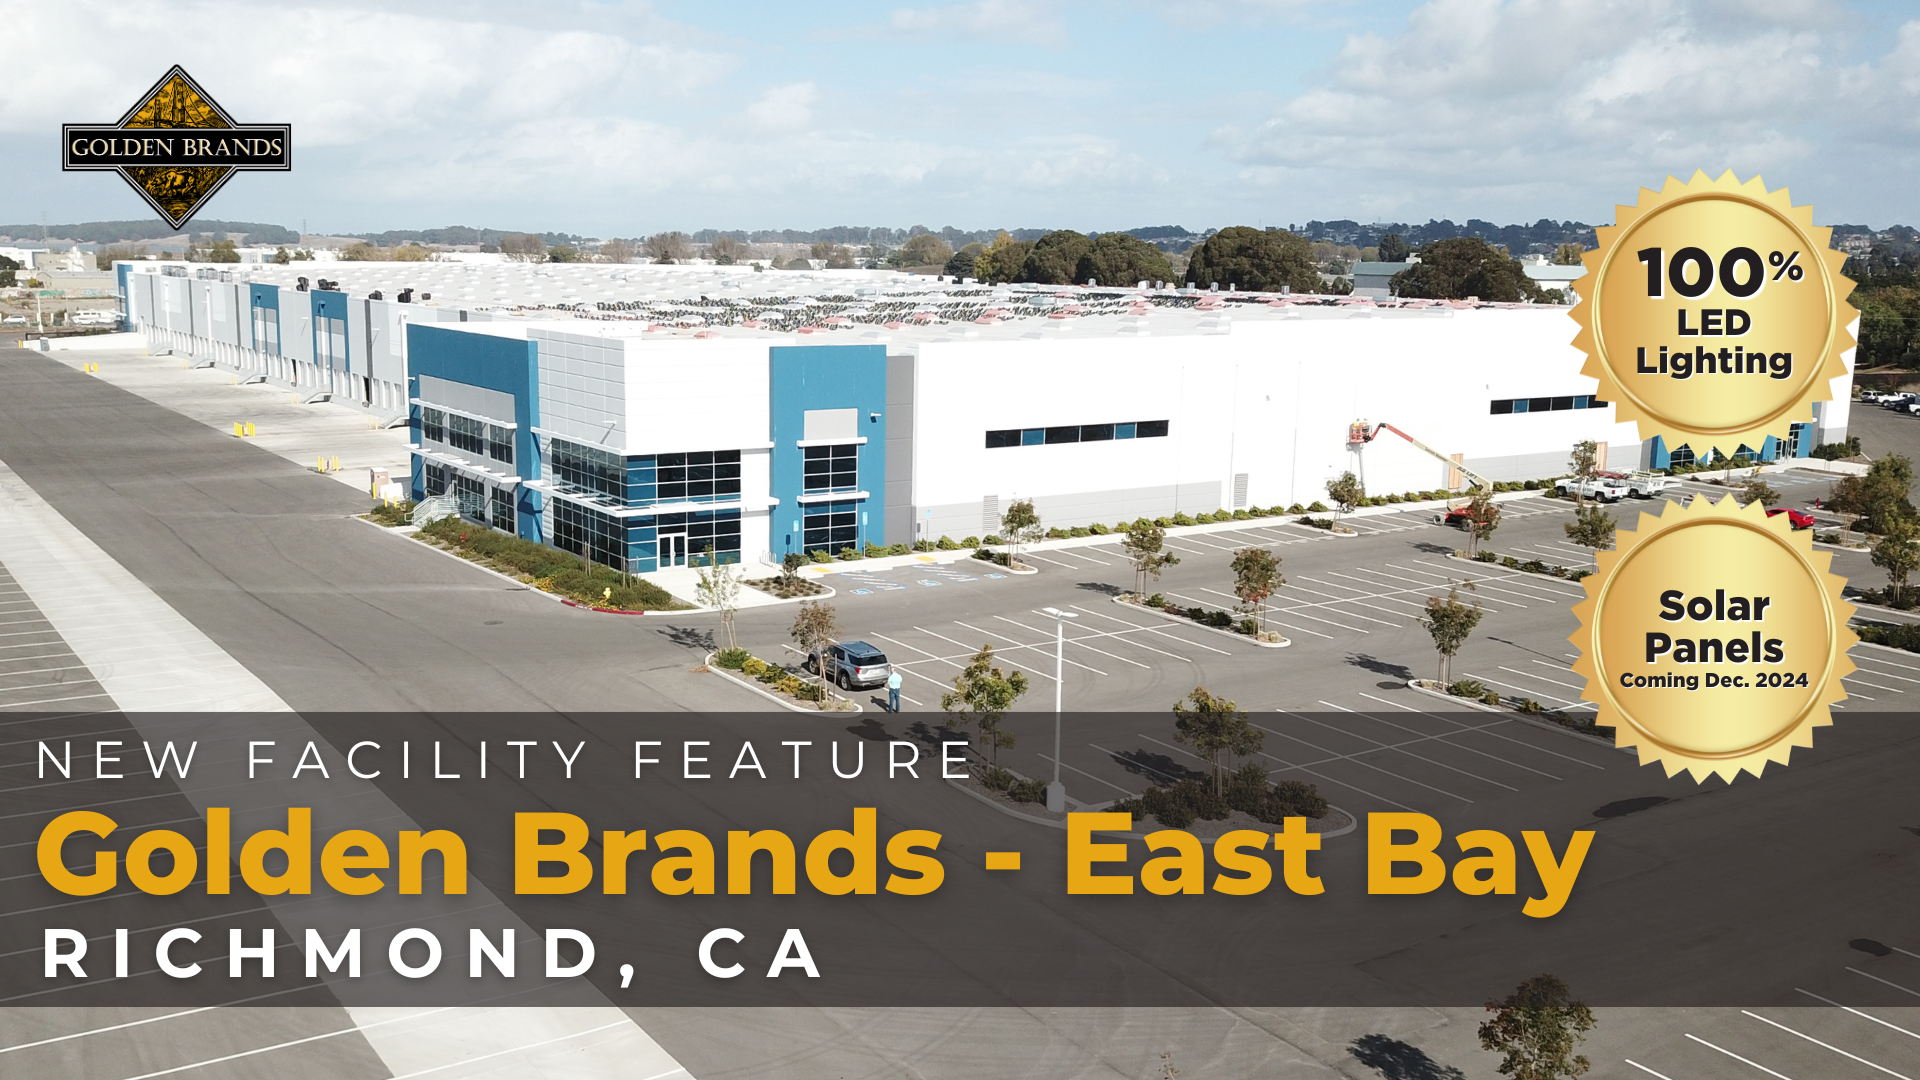 Warehouse facility with text overlay introducing the new Golden Brands - East Bay facility in Richmond, CA